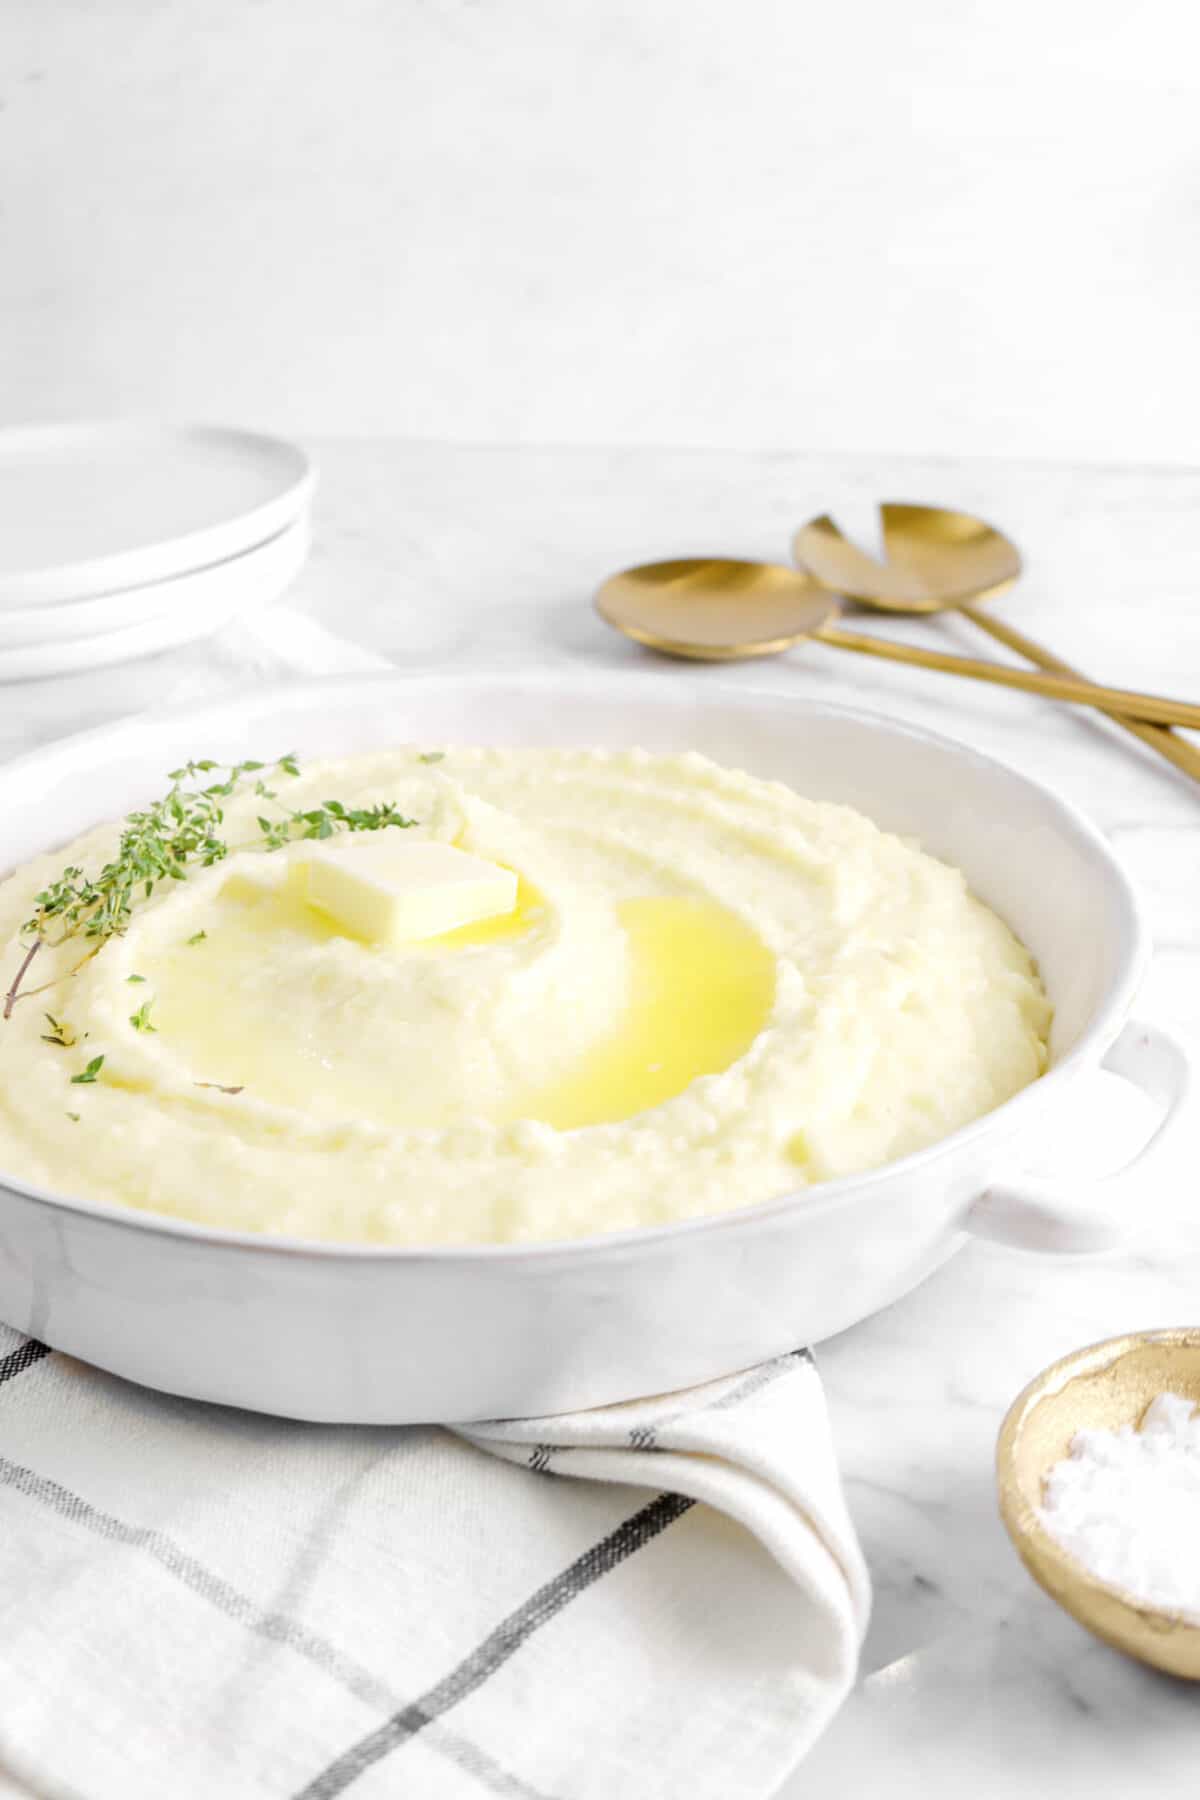 mashed potatoes with melted butter, thyme leaves on top with plates and serving spoons behind